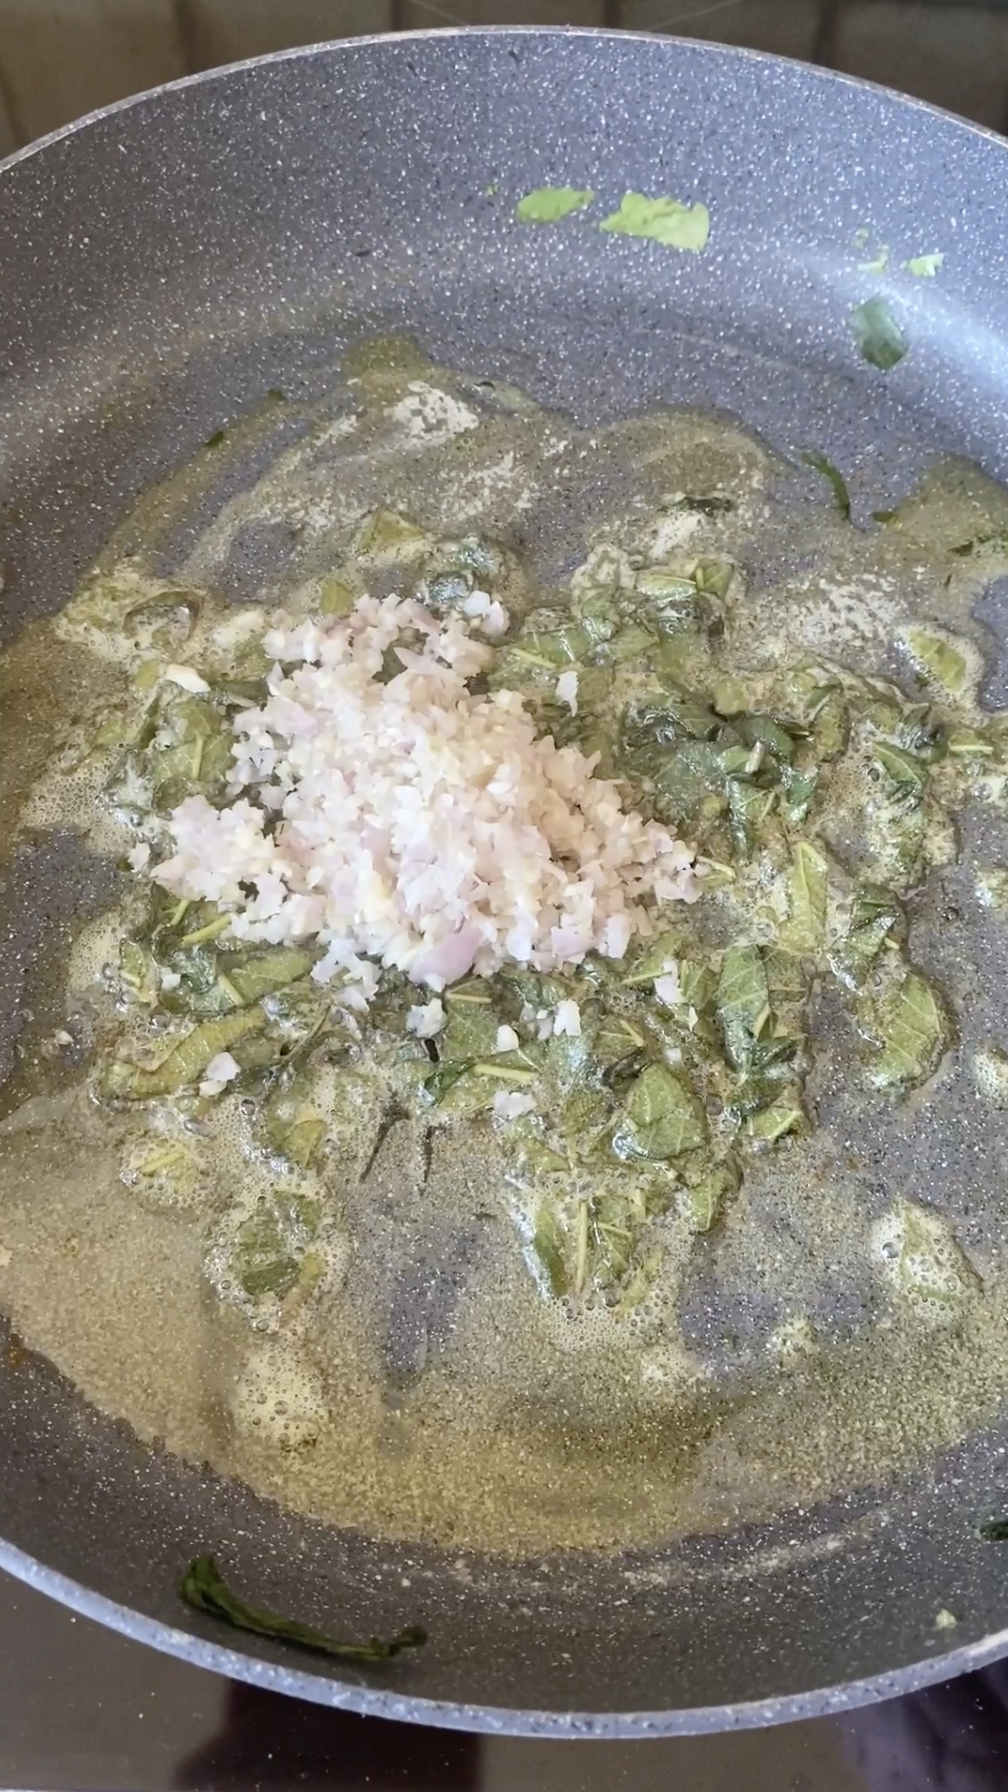 Minced shallot added to the frying pan with melted butter and chopped sage leaves.